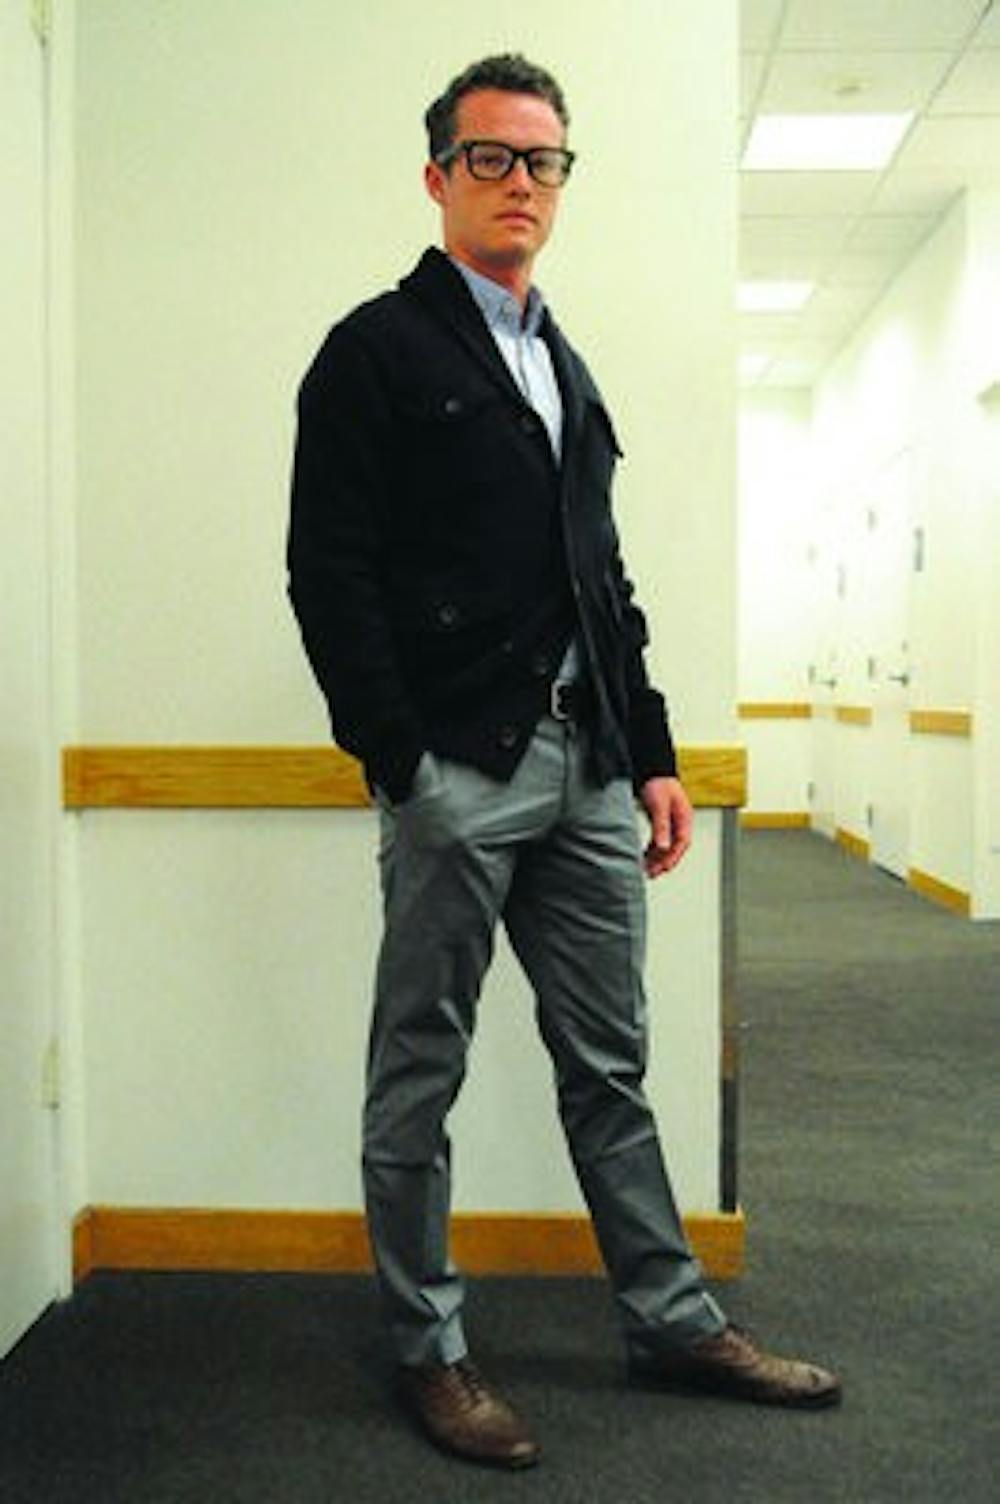 Gray Gill models a slim, one-pocket shirt with straight leg classic khakis and a four-pocket shawl cardigan for a daytime business casual look from The Gap. (Christen Harned / ASSISTANT PHOTO EDITOR)